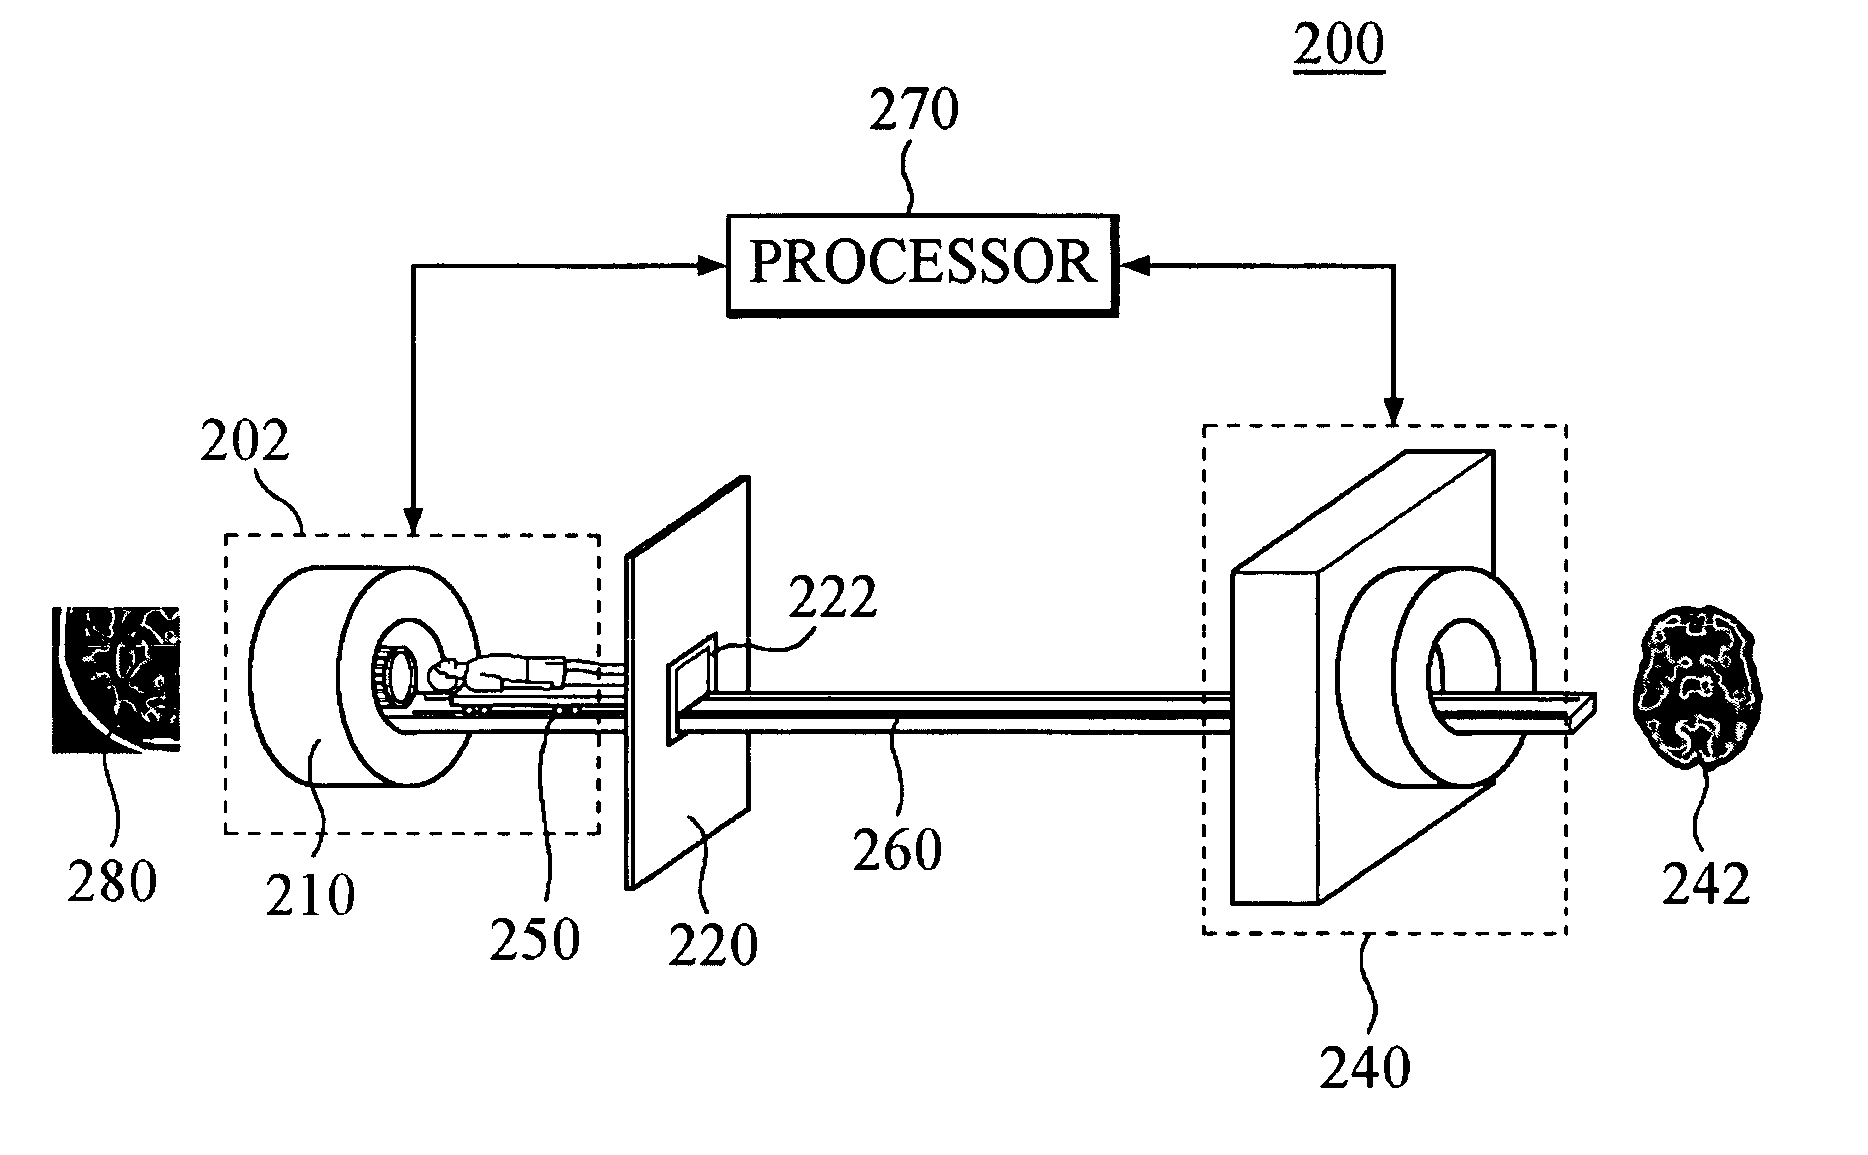 PET - MRI hybrid apparatus and method of implementing the same